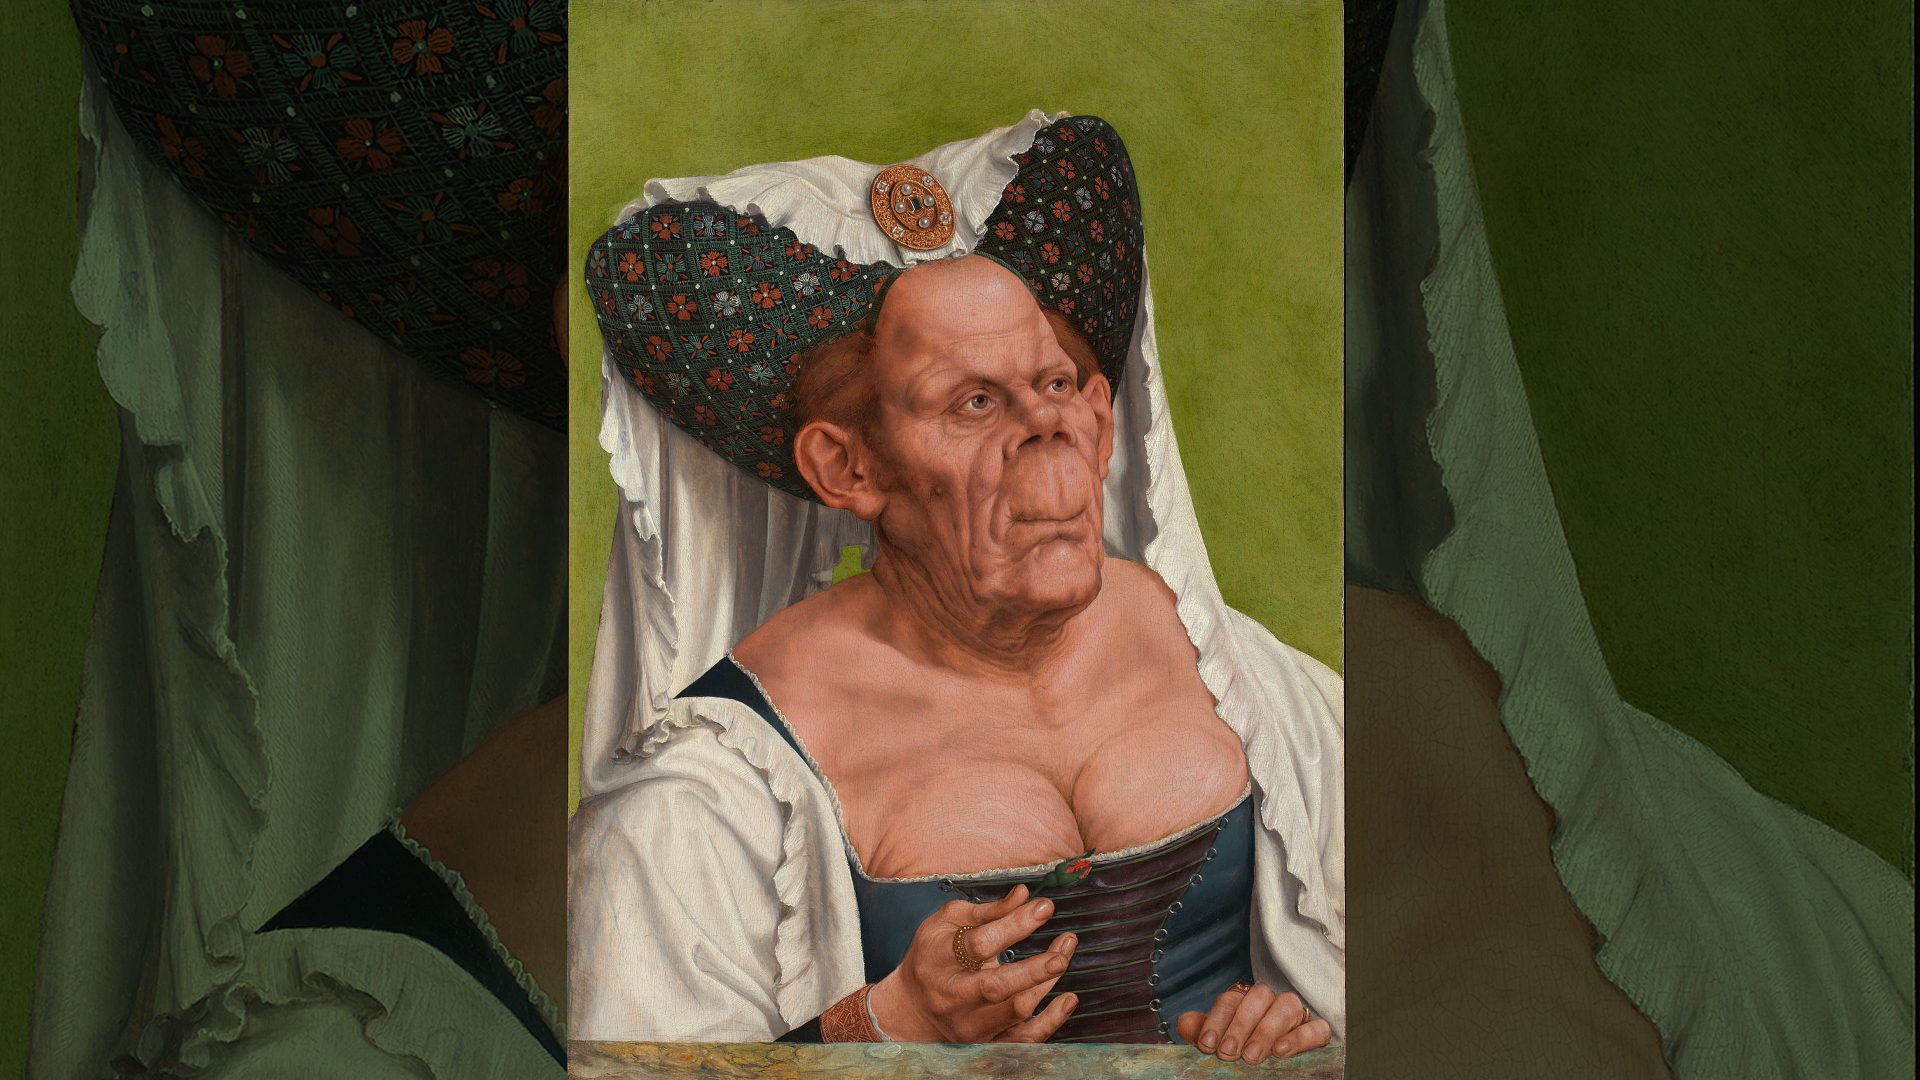 An Old Woman 
(The Ugly Duchess) 
c. 1513, by Flemish 
painter Quinten 
Massys. Photo: National 
Gallery, London